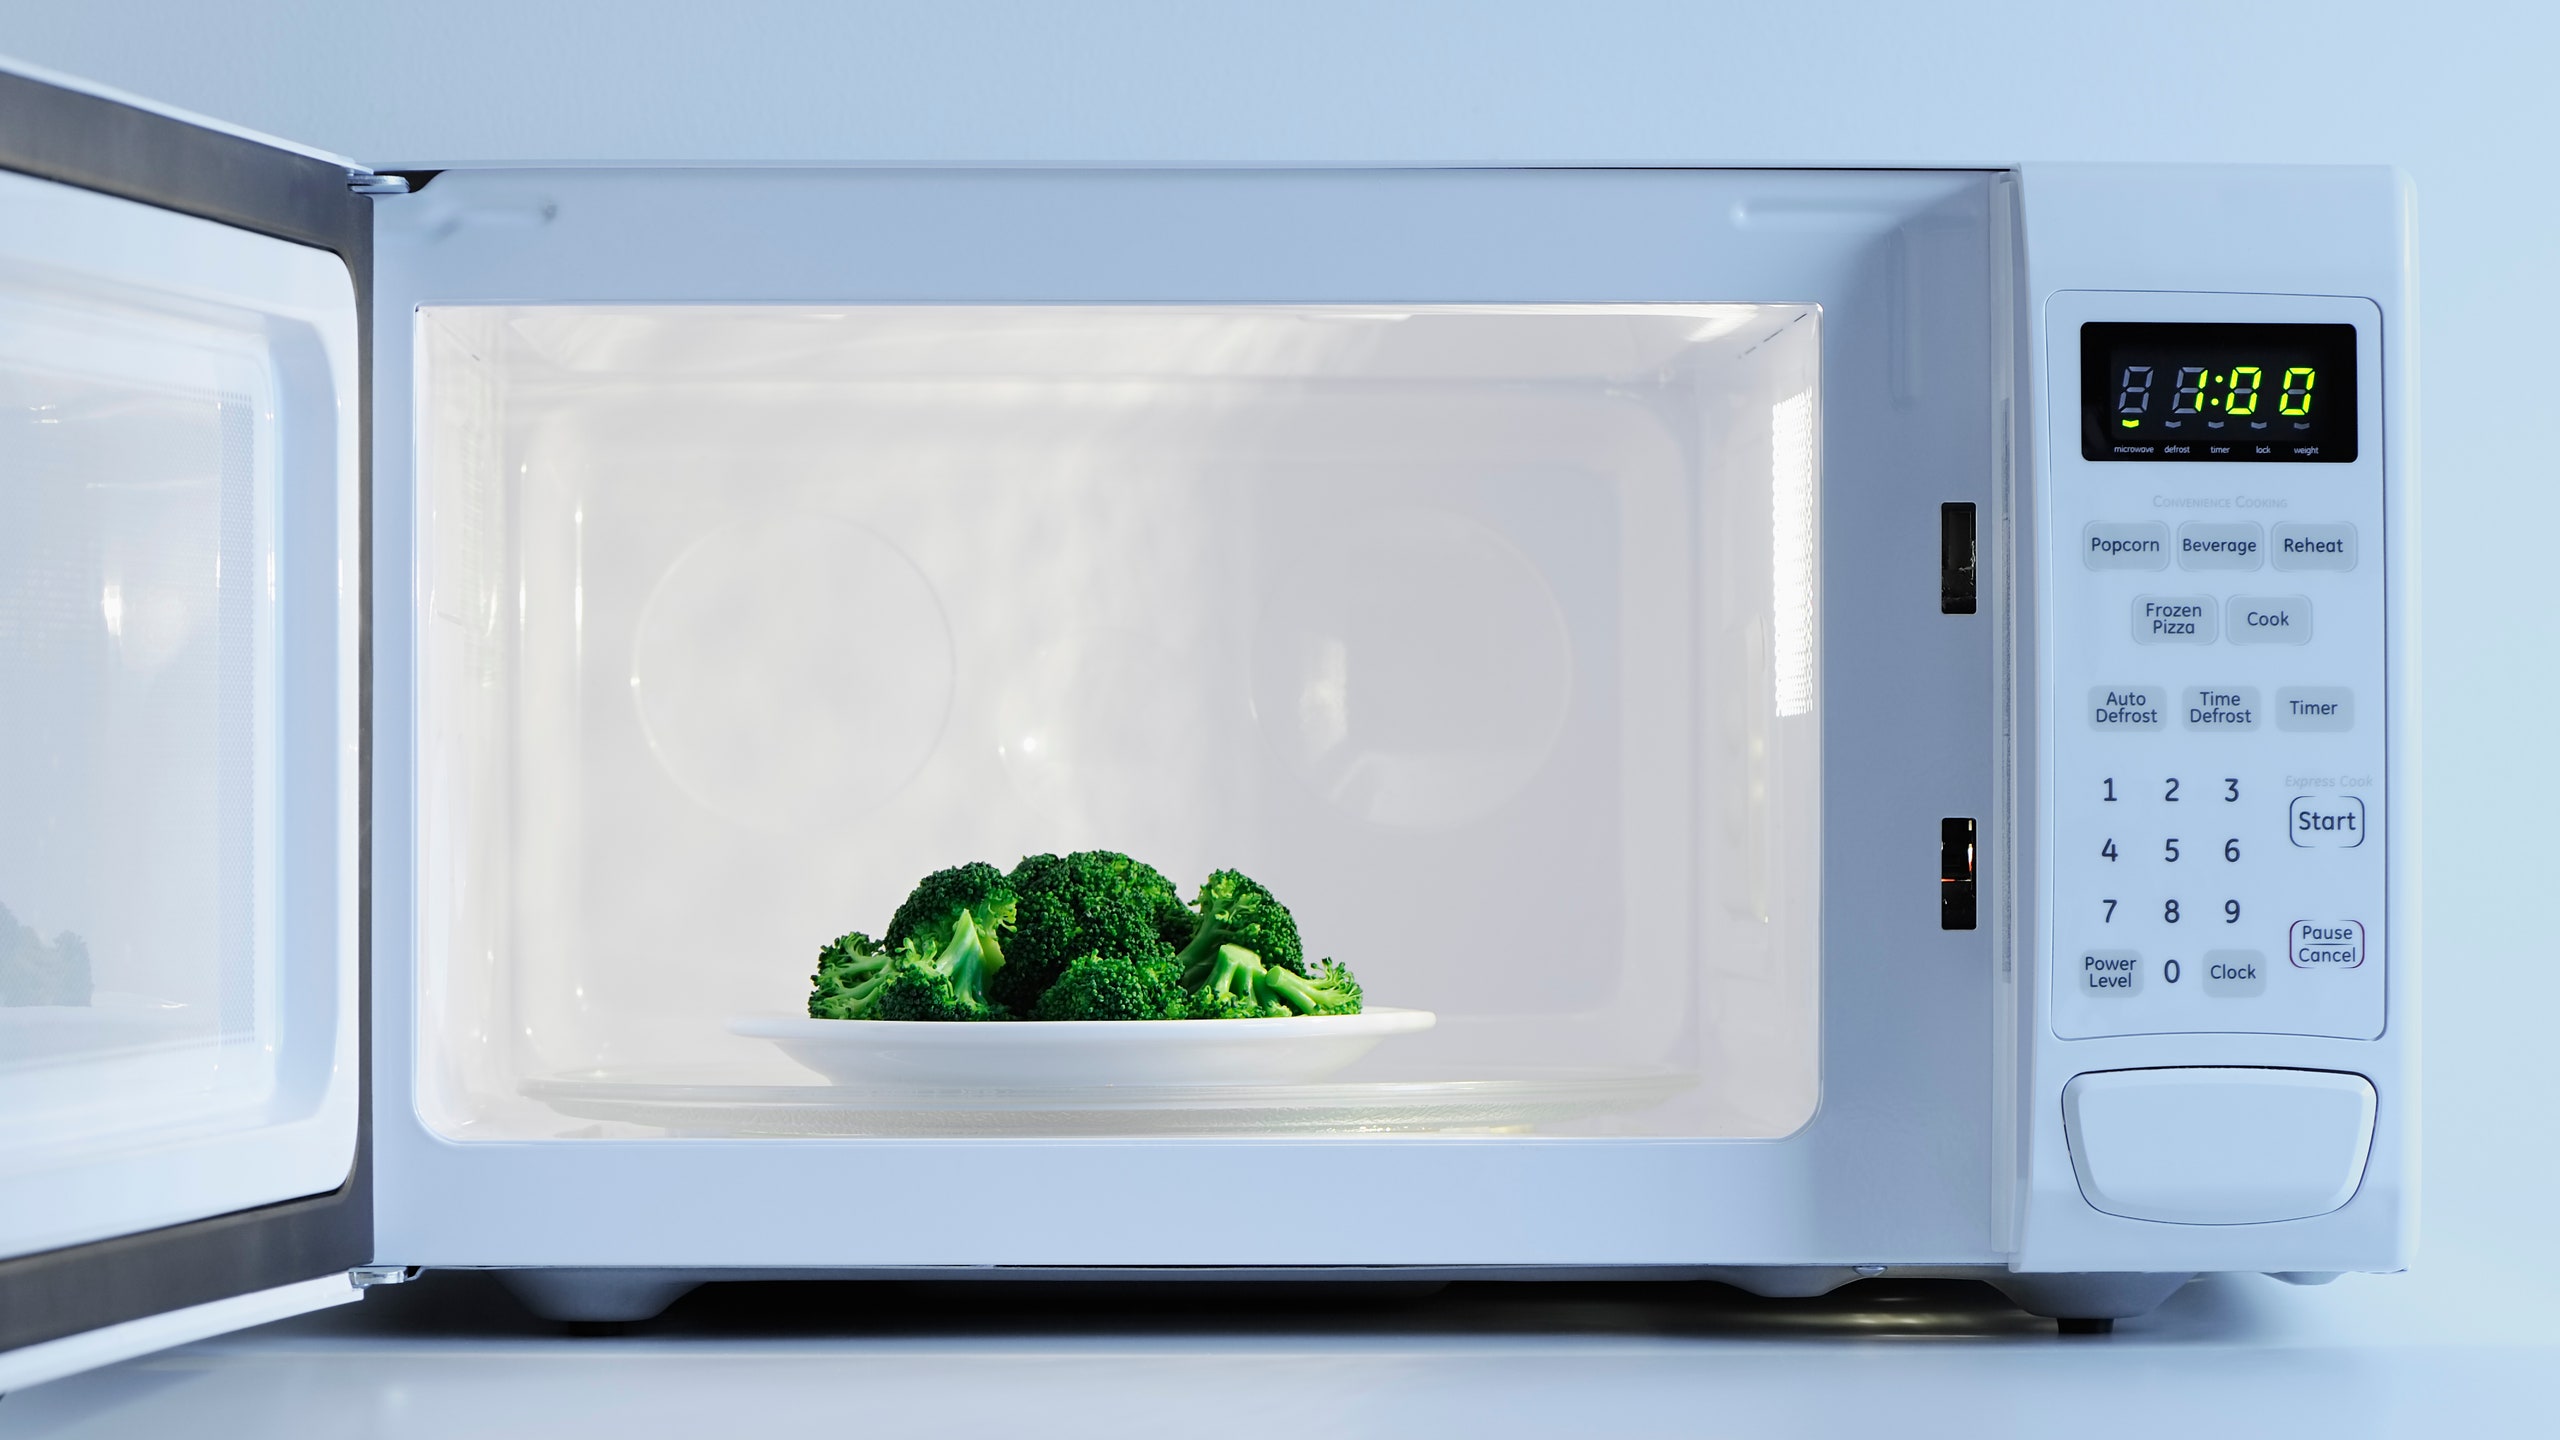 what-is-1-1-2-minutes-on-a-microwave